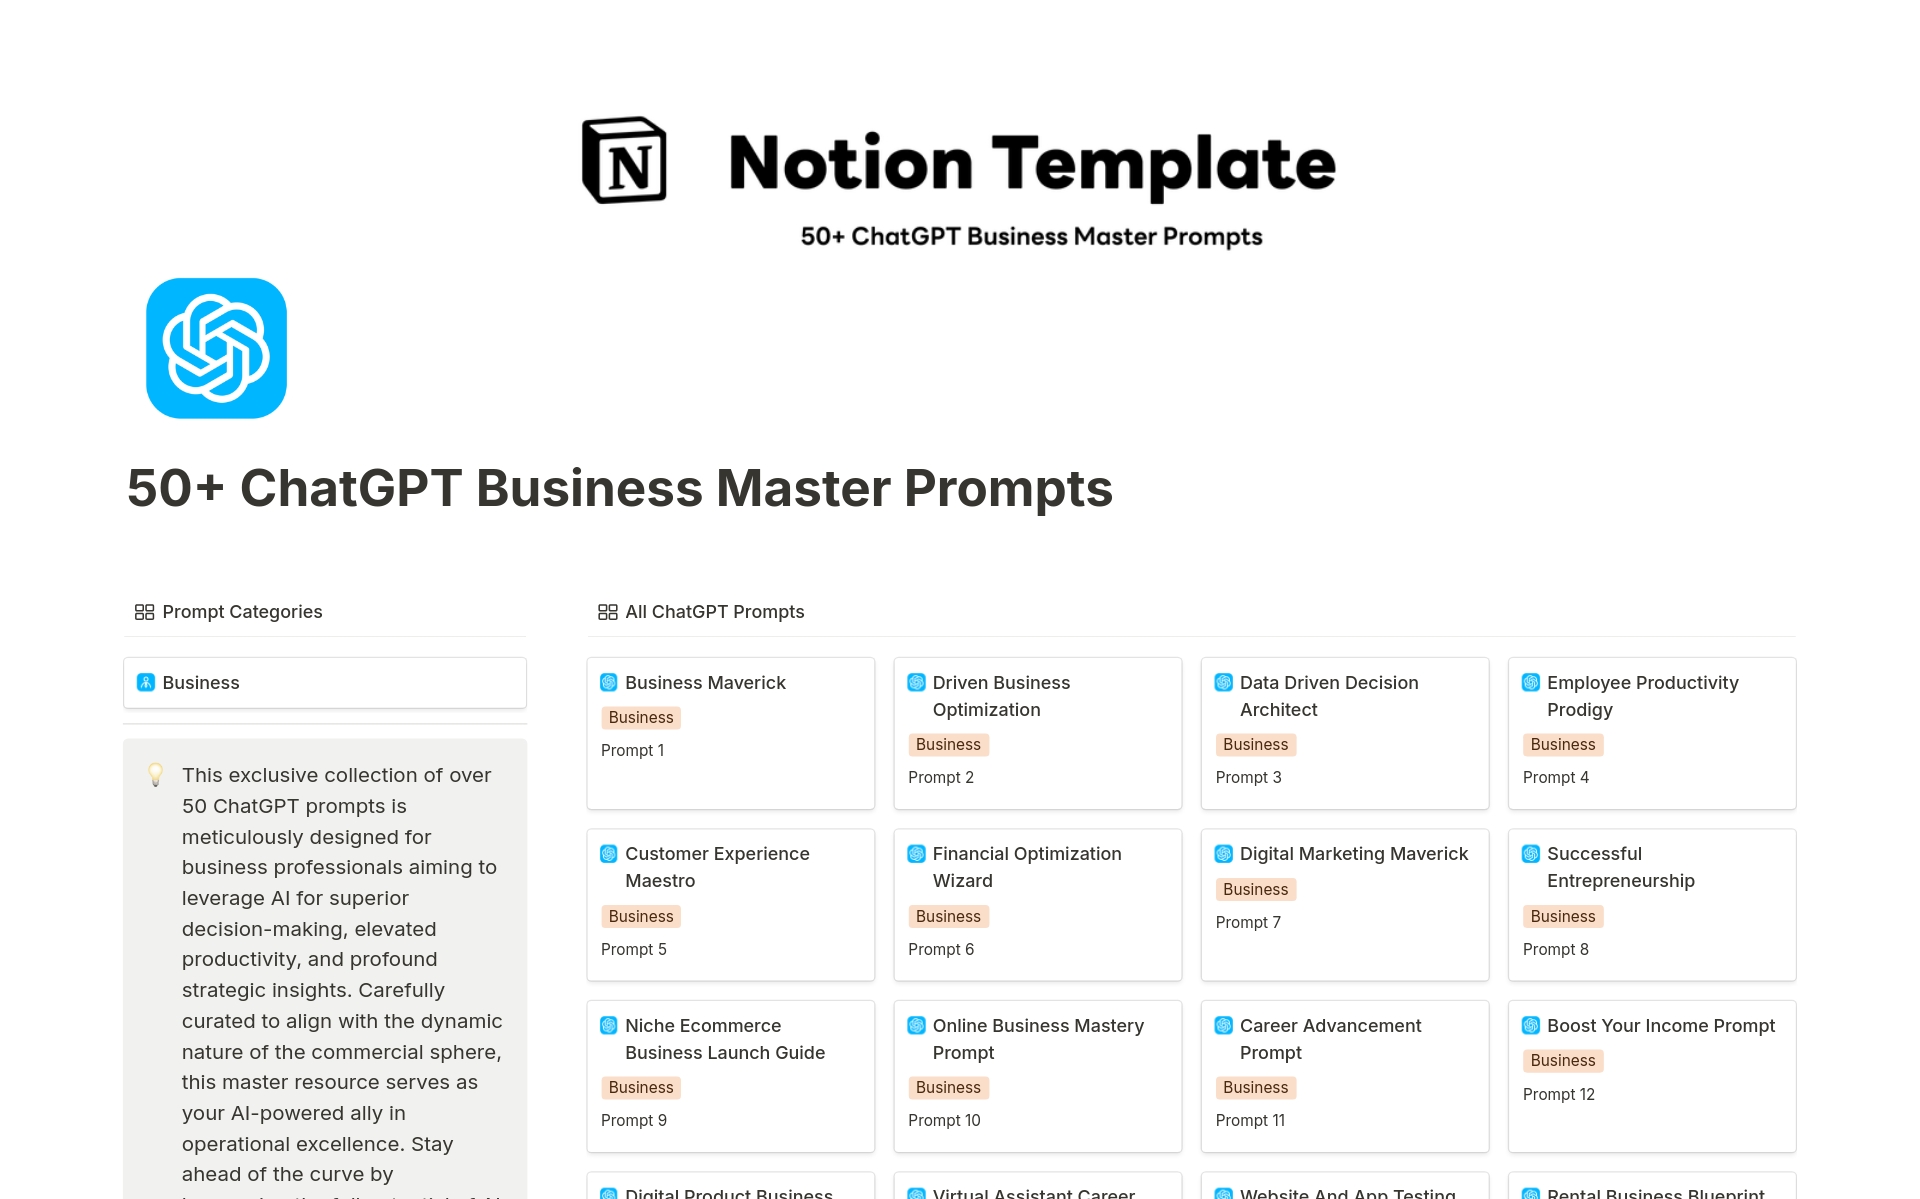 Elevate your business strategy with our suite of 50+ ChatGPT-powered prompts. Tailored for savvy entrepreneurs and business mavens, this toolkit streamlines decision-making and fosters innovation.